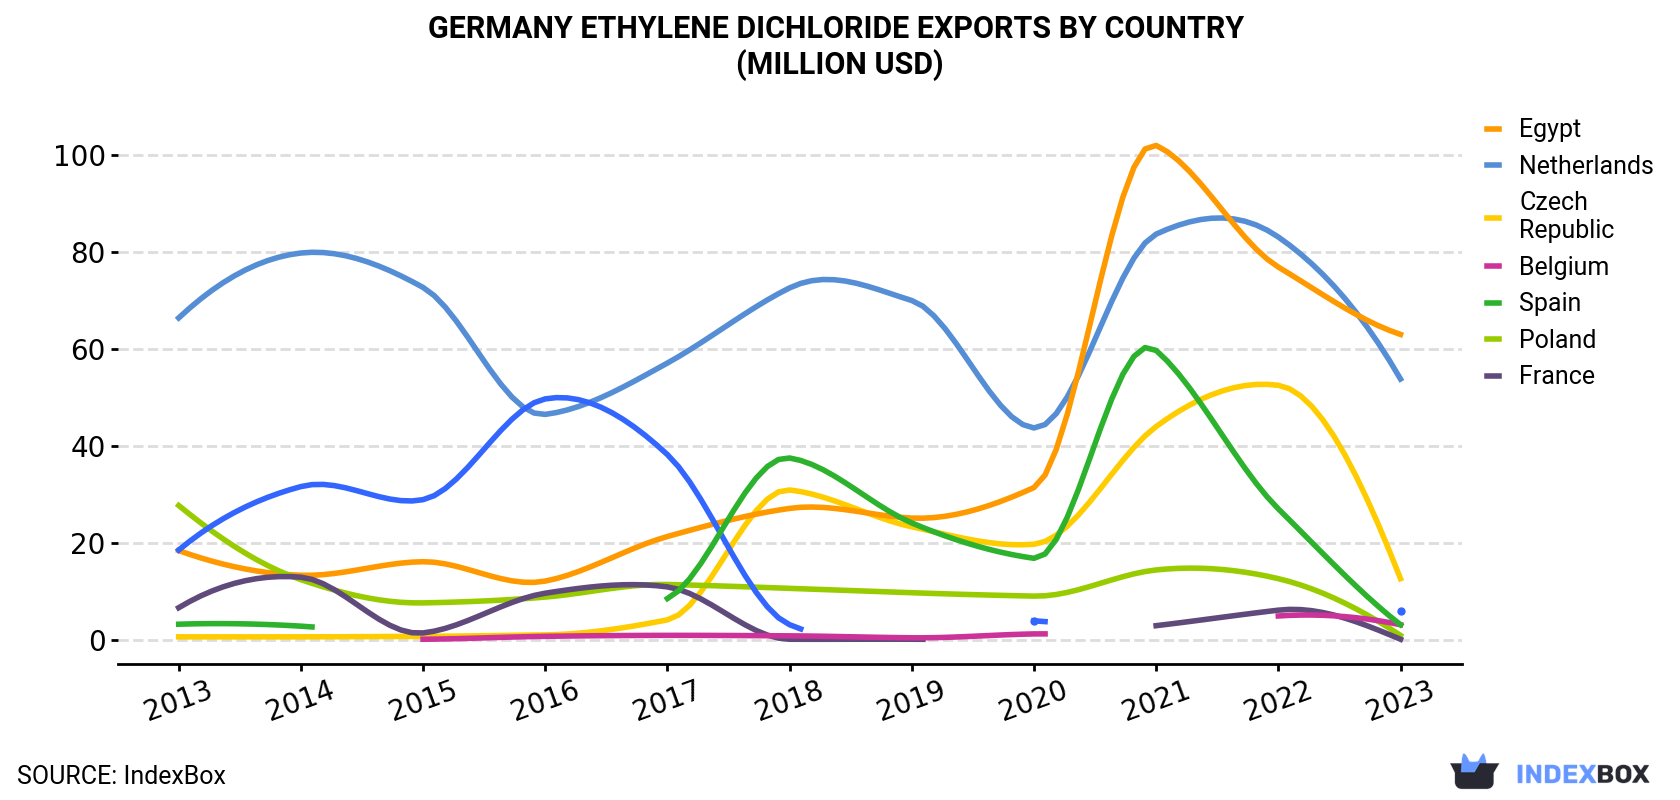 Germany Ethylene Dichloride Exports By Country (Million USD)